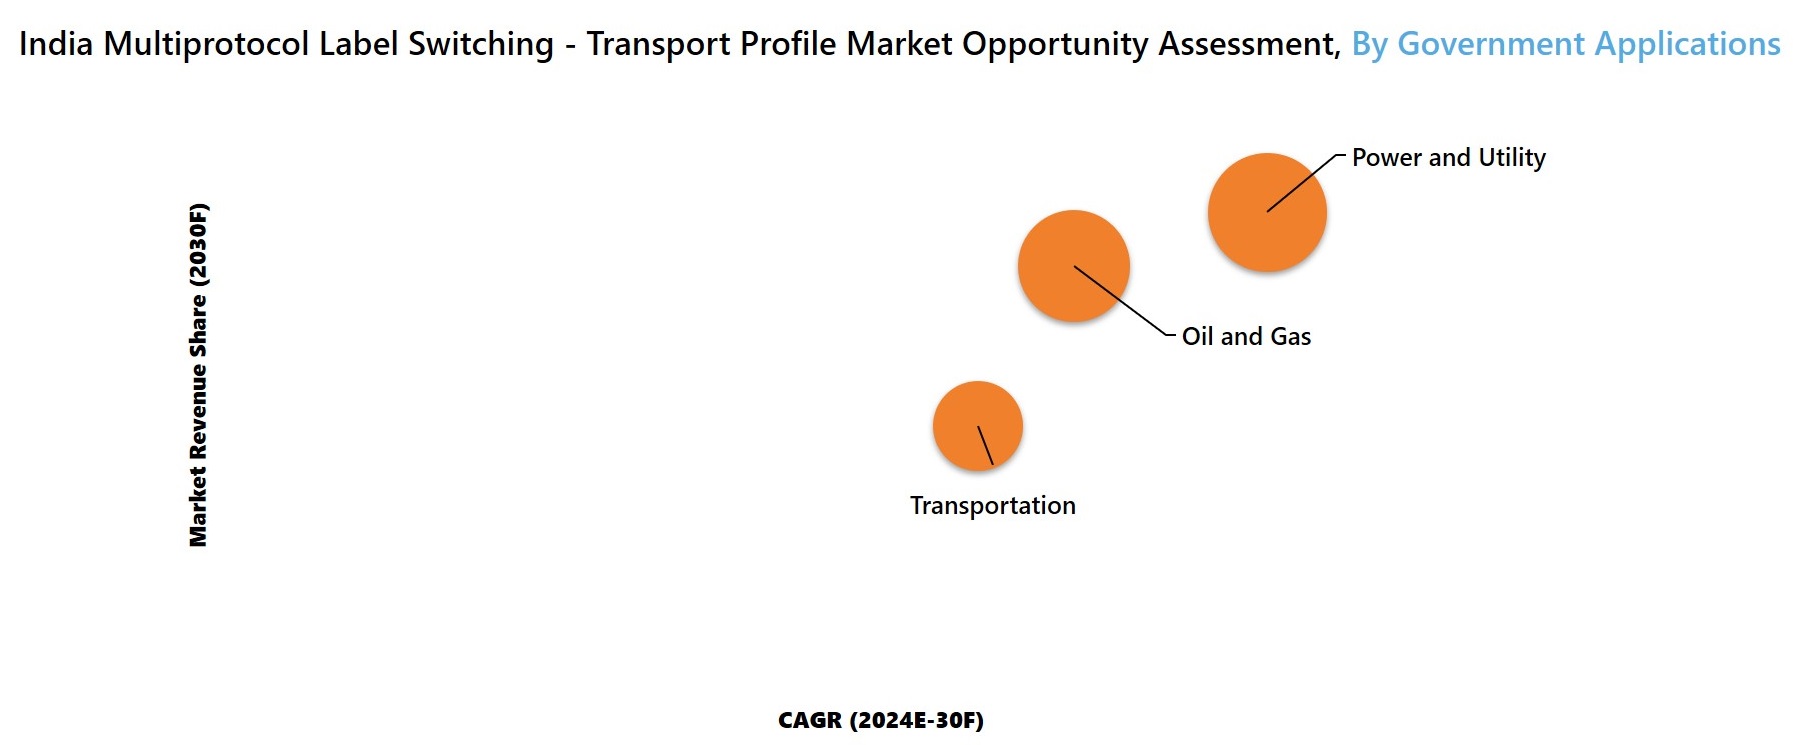 India Multiprotocol Label Switching - Transport Profile Market Opportunity Assessment